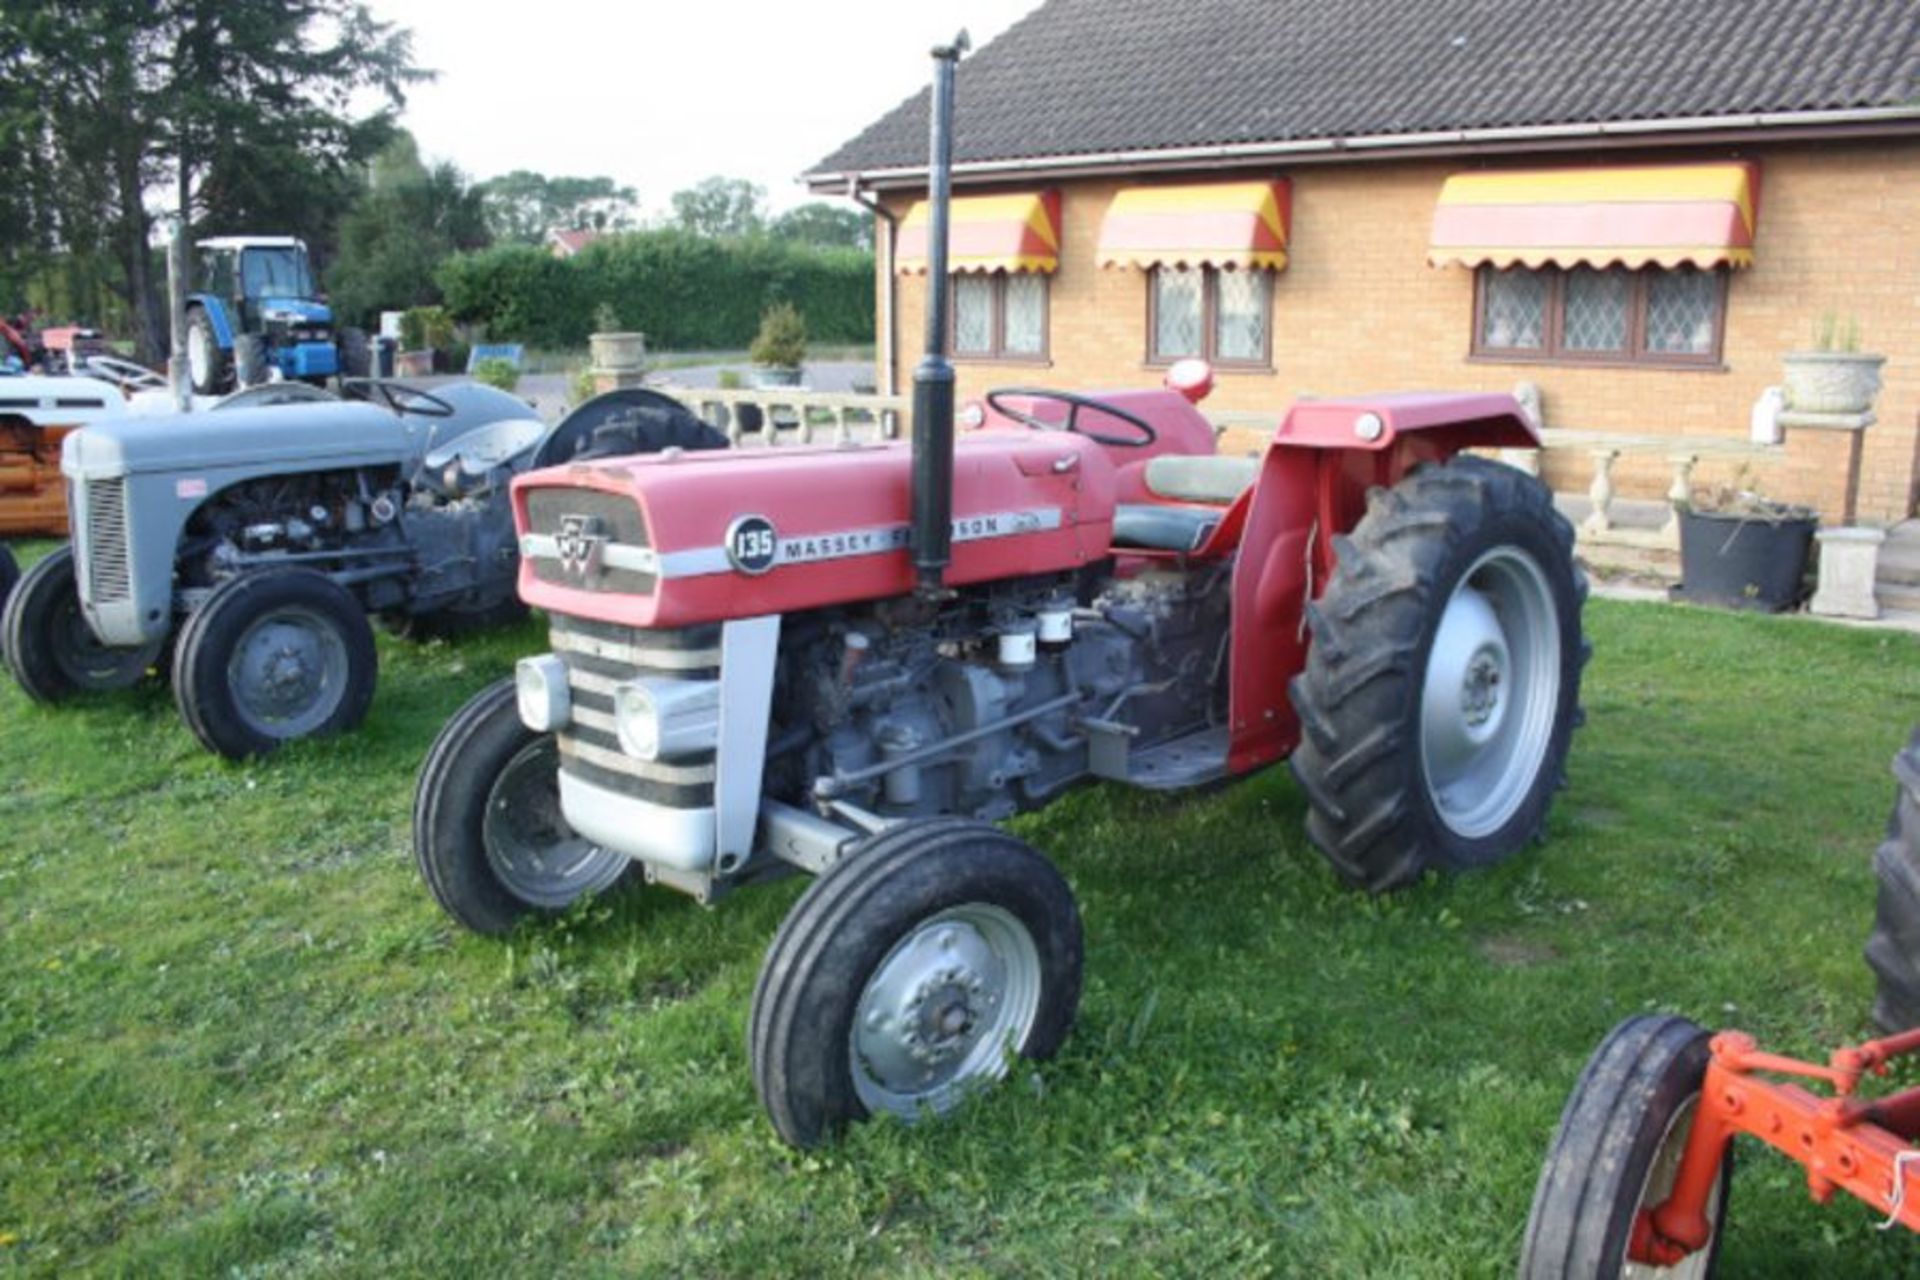 Massey Ferguson 135, straight front axle, new clock, with pick-up hitch, SN 424308. 12.4-28 rear